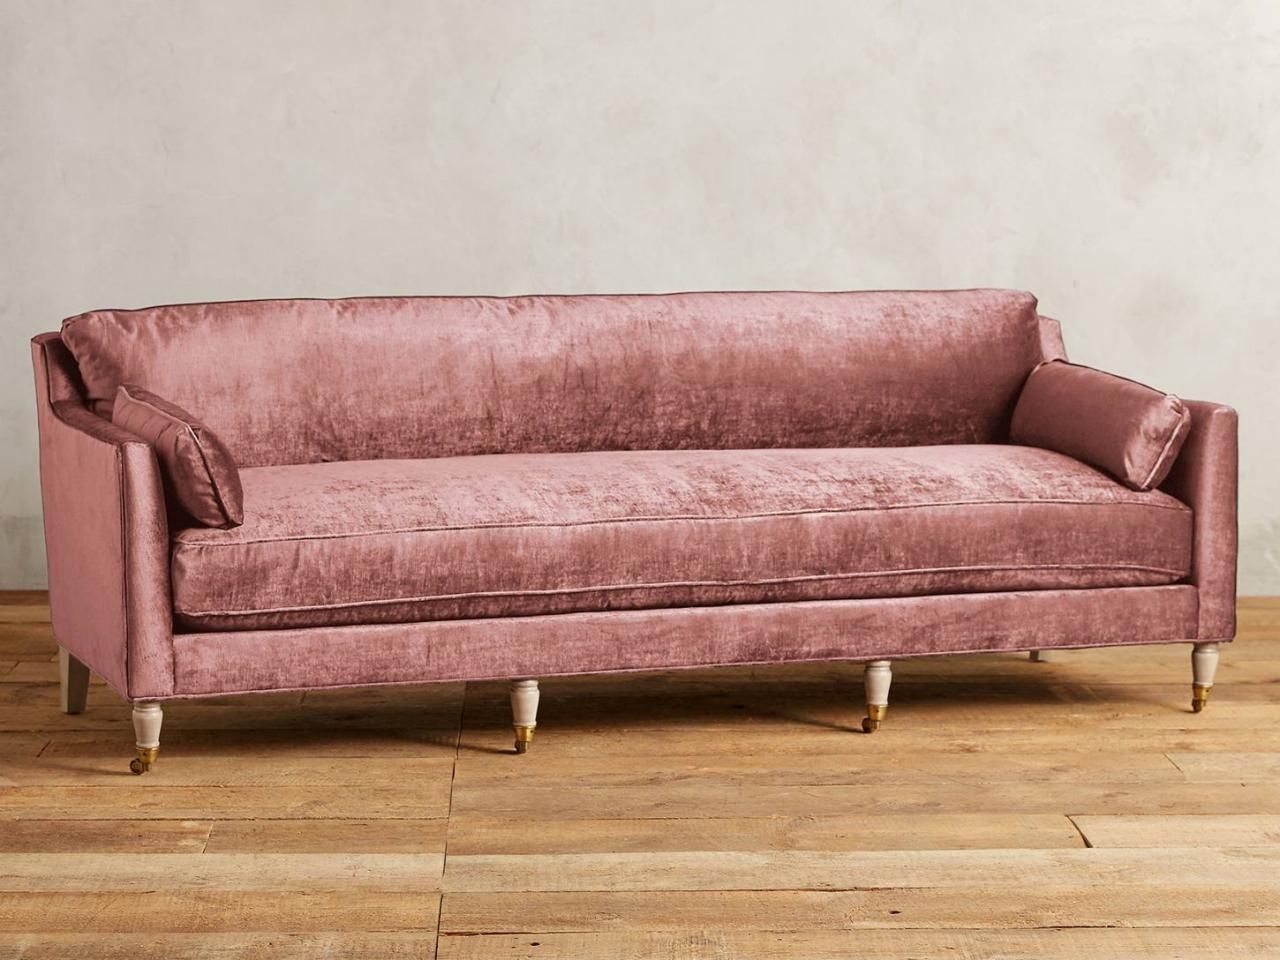 11 Of The Best Velvet Sofas To Decorate With | Hgtv's Decorating With Regard To Velvet Sofas (Photo 10 of 10)